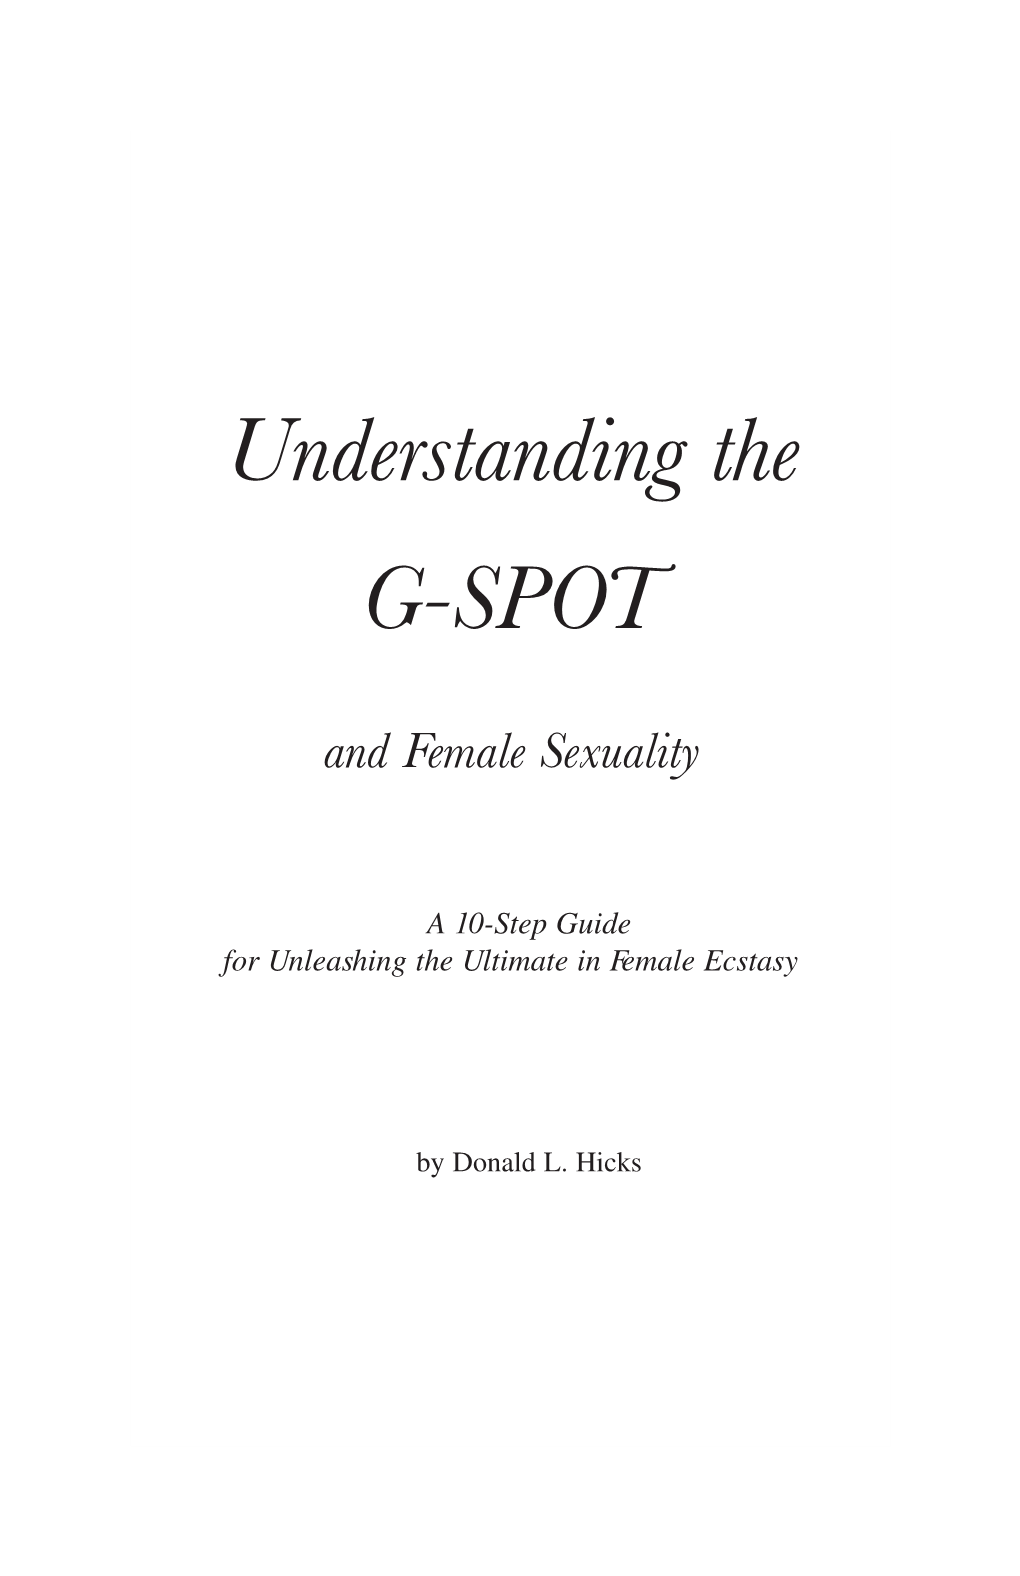 Understanding the G-Spot and Female Sexuality: a 10-Step Guide for Unleashing the Ultimate in Female Ecstasy